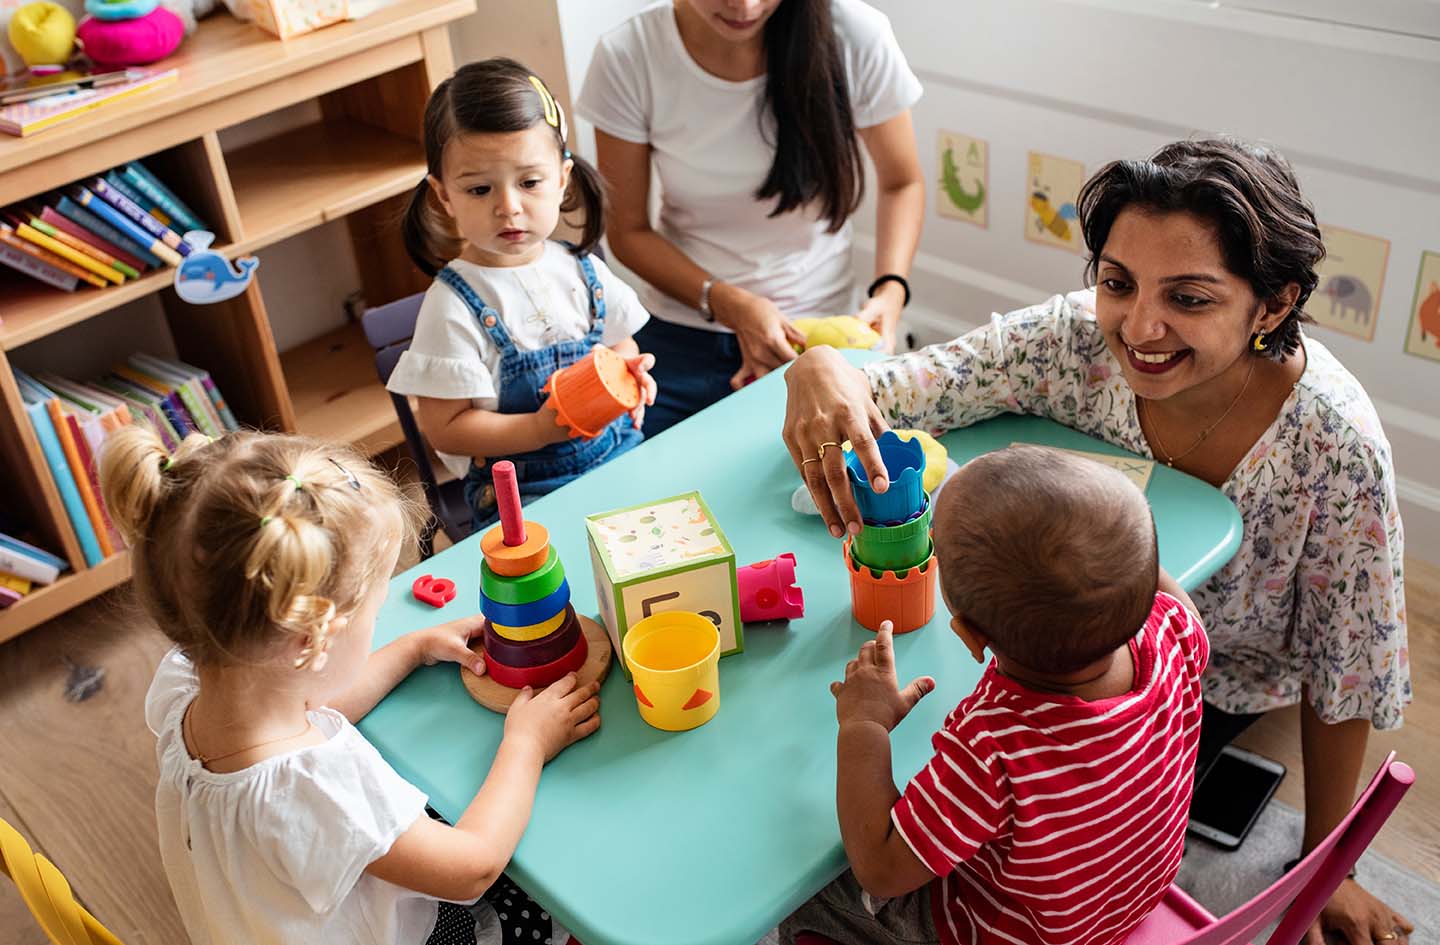 Child care teacher sitting at table with children